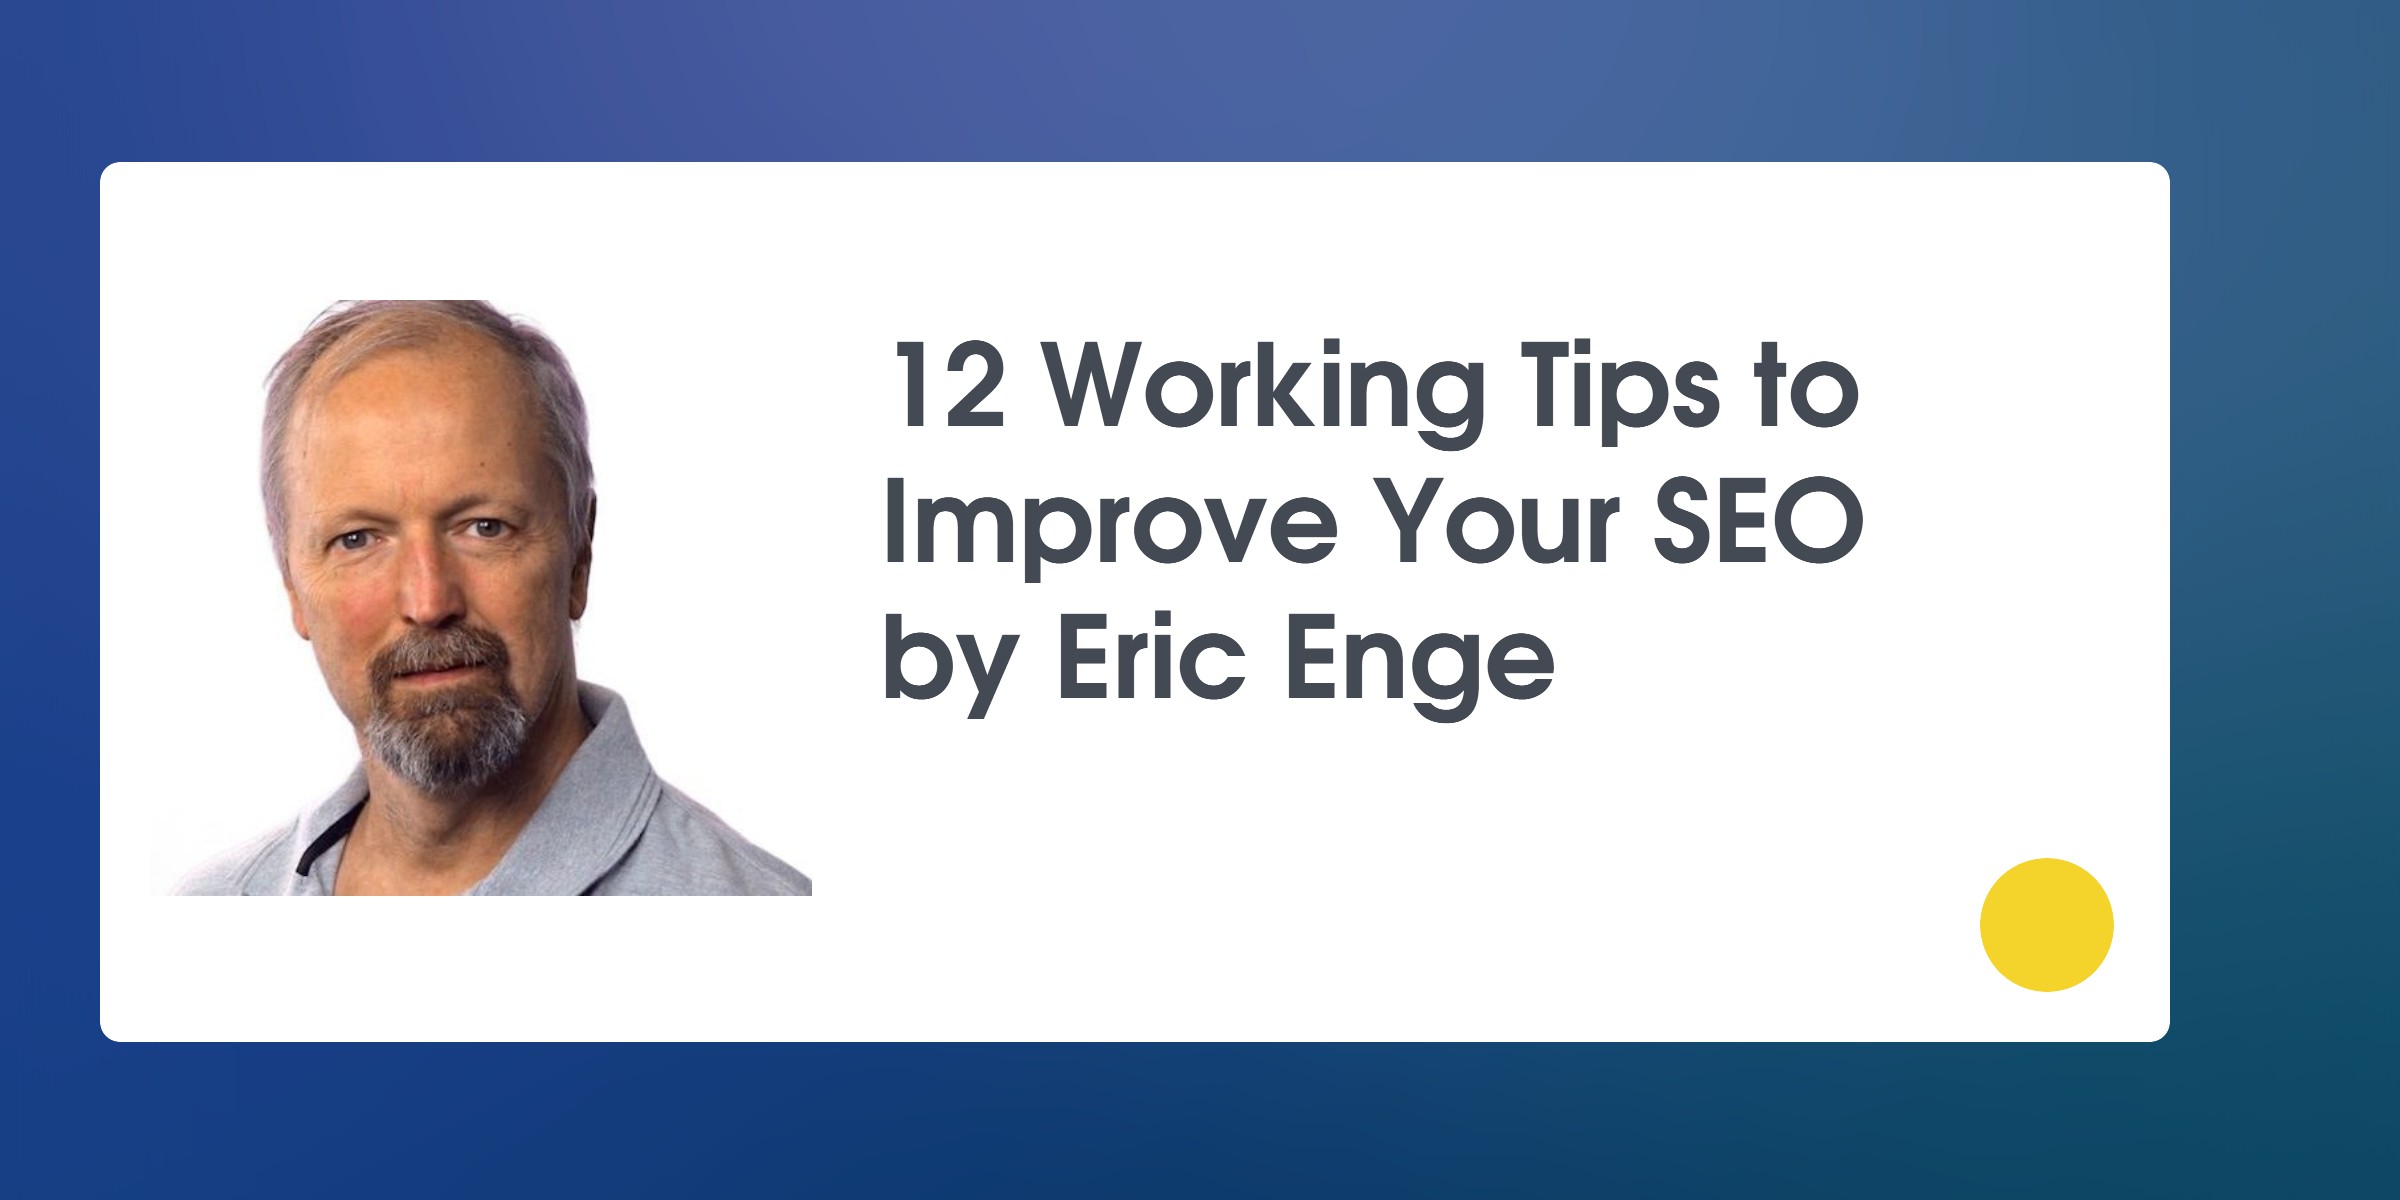 12-Working-Tips-to-Improve-Your-SEO-by-Eric-Enge